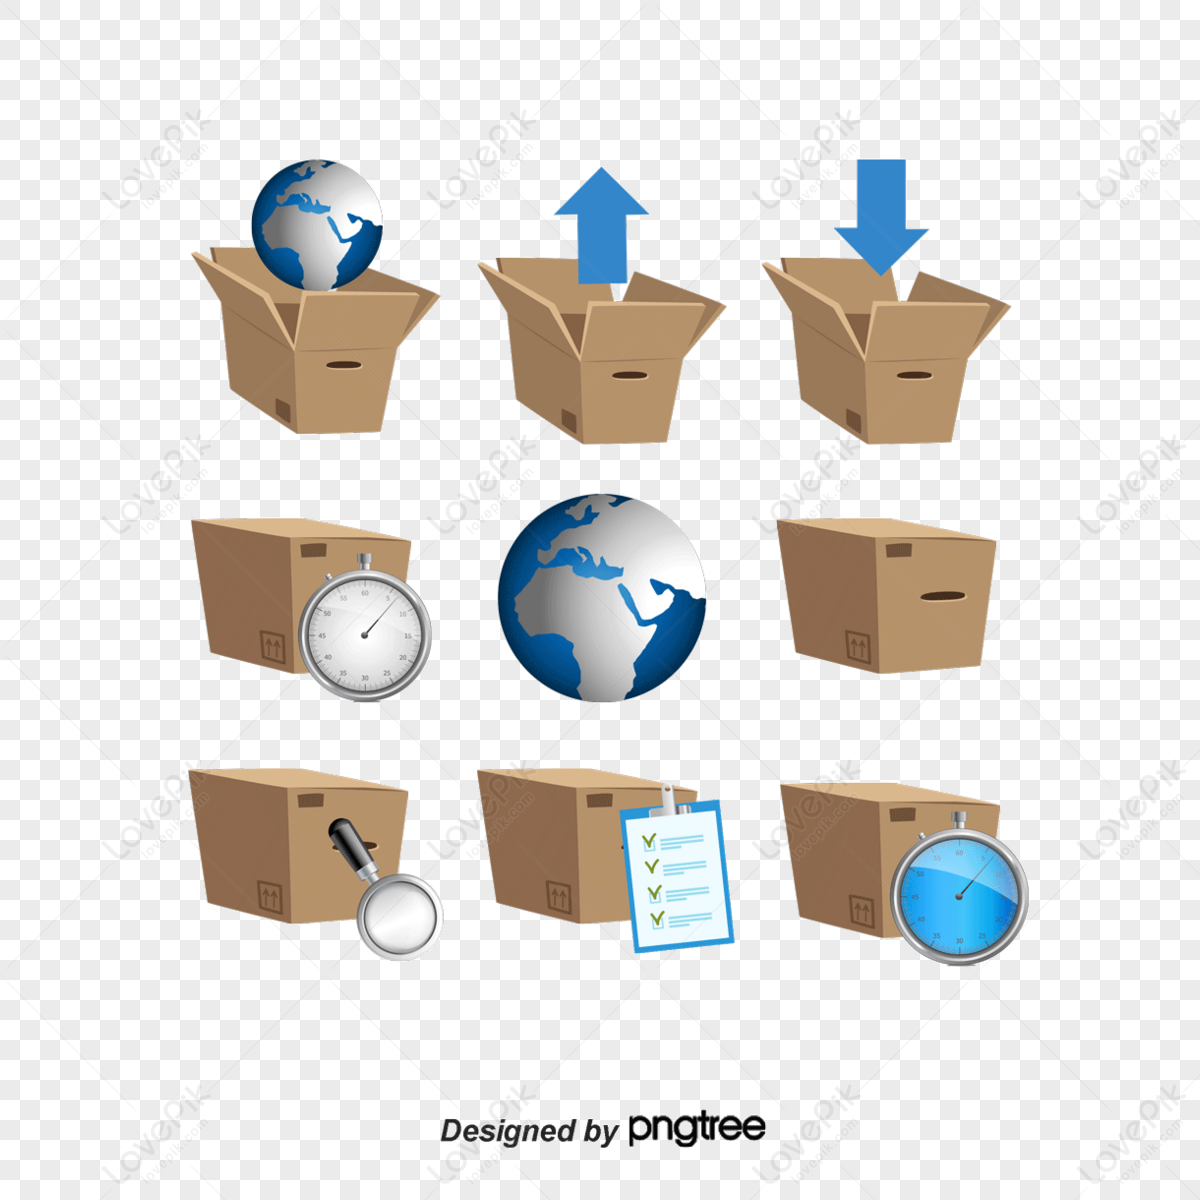 Express Delivery Icon PNG Images, Vectors Free Download - Pngtree